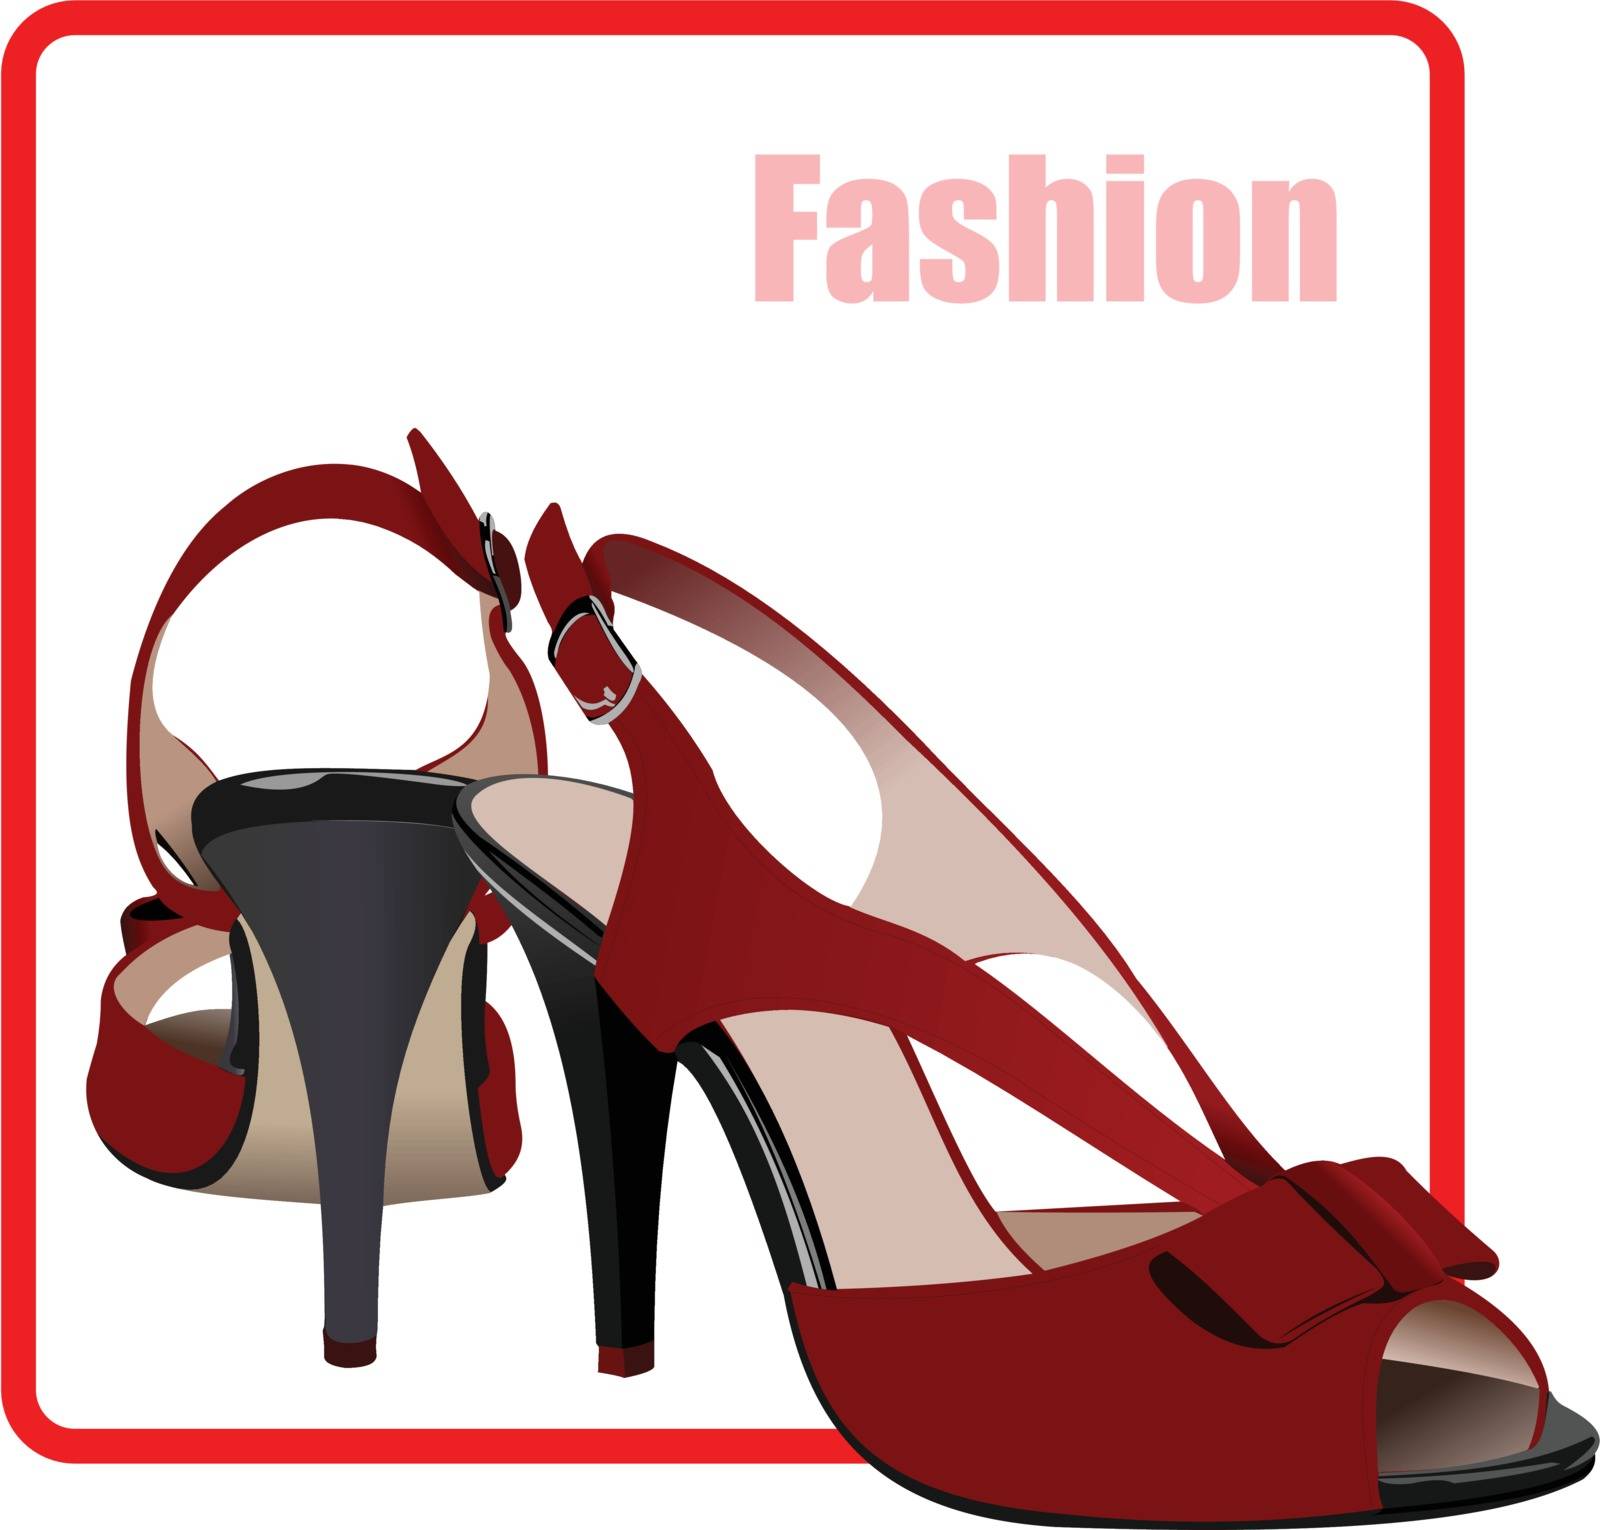 Fashion woman red shoes poster. Vector illustration